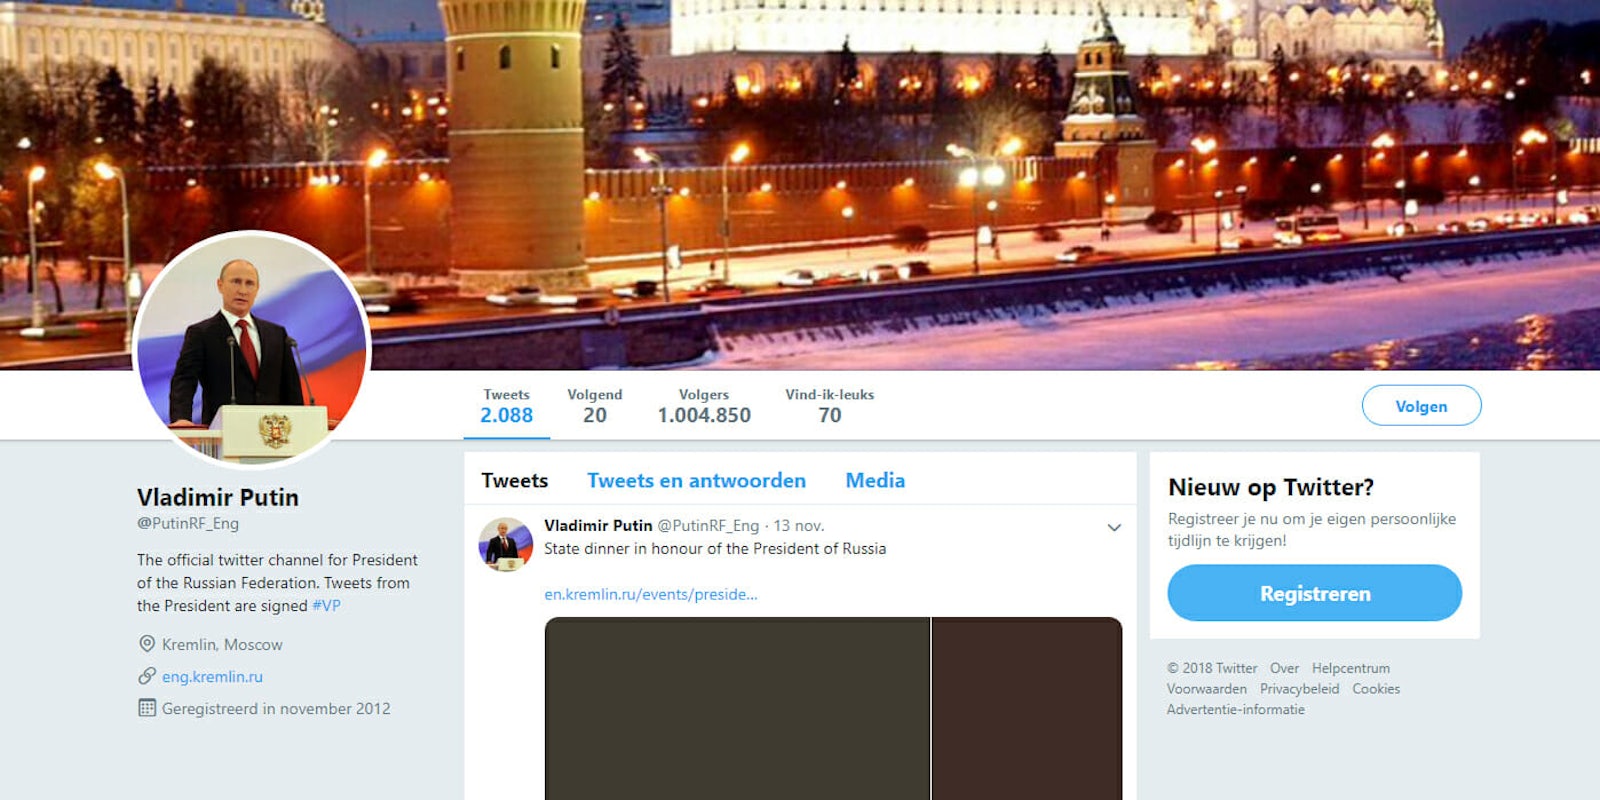 Twitter banned an account that was impersonating Vladimir Putin.